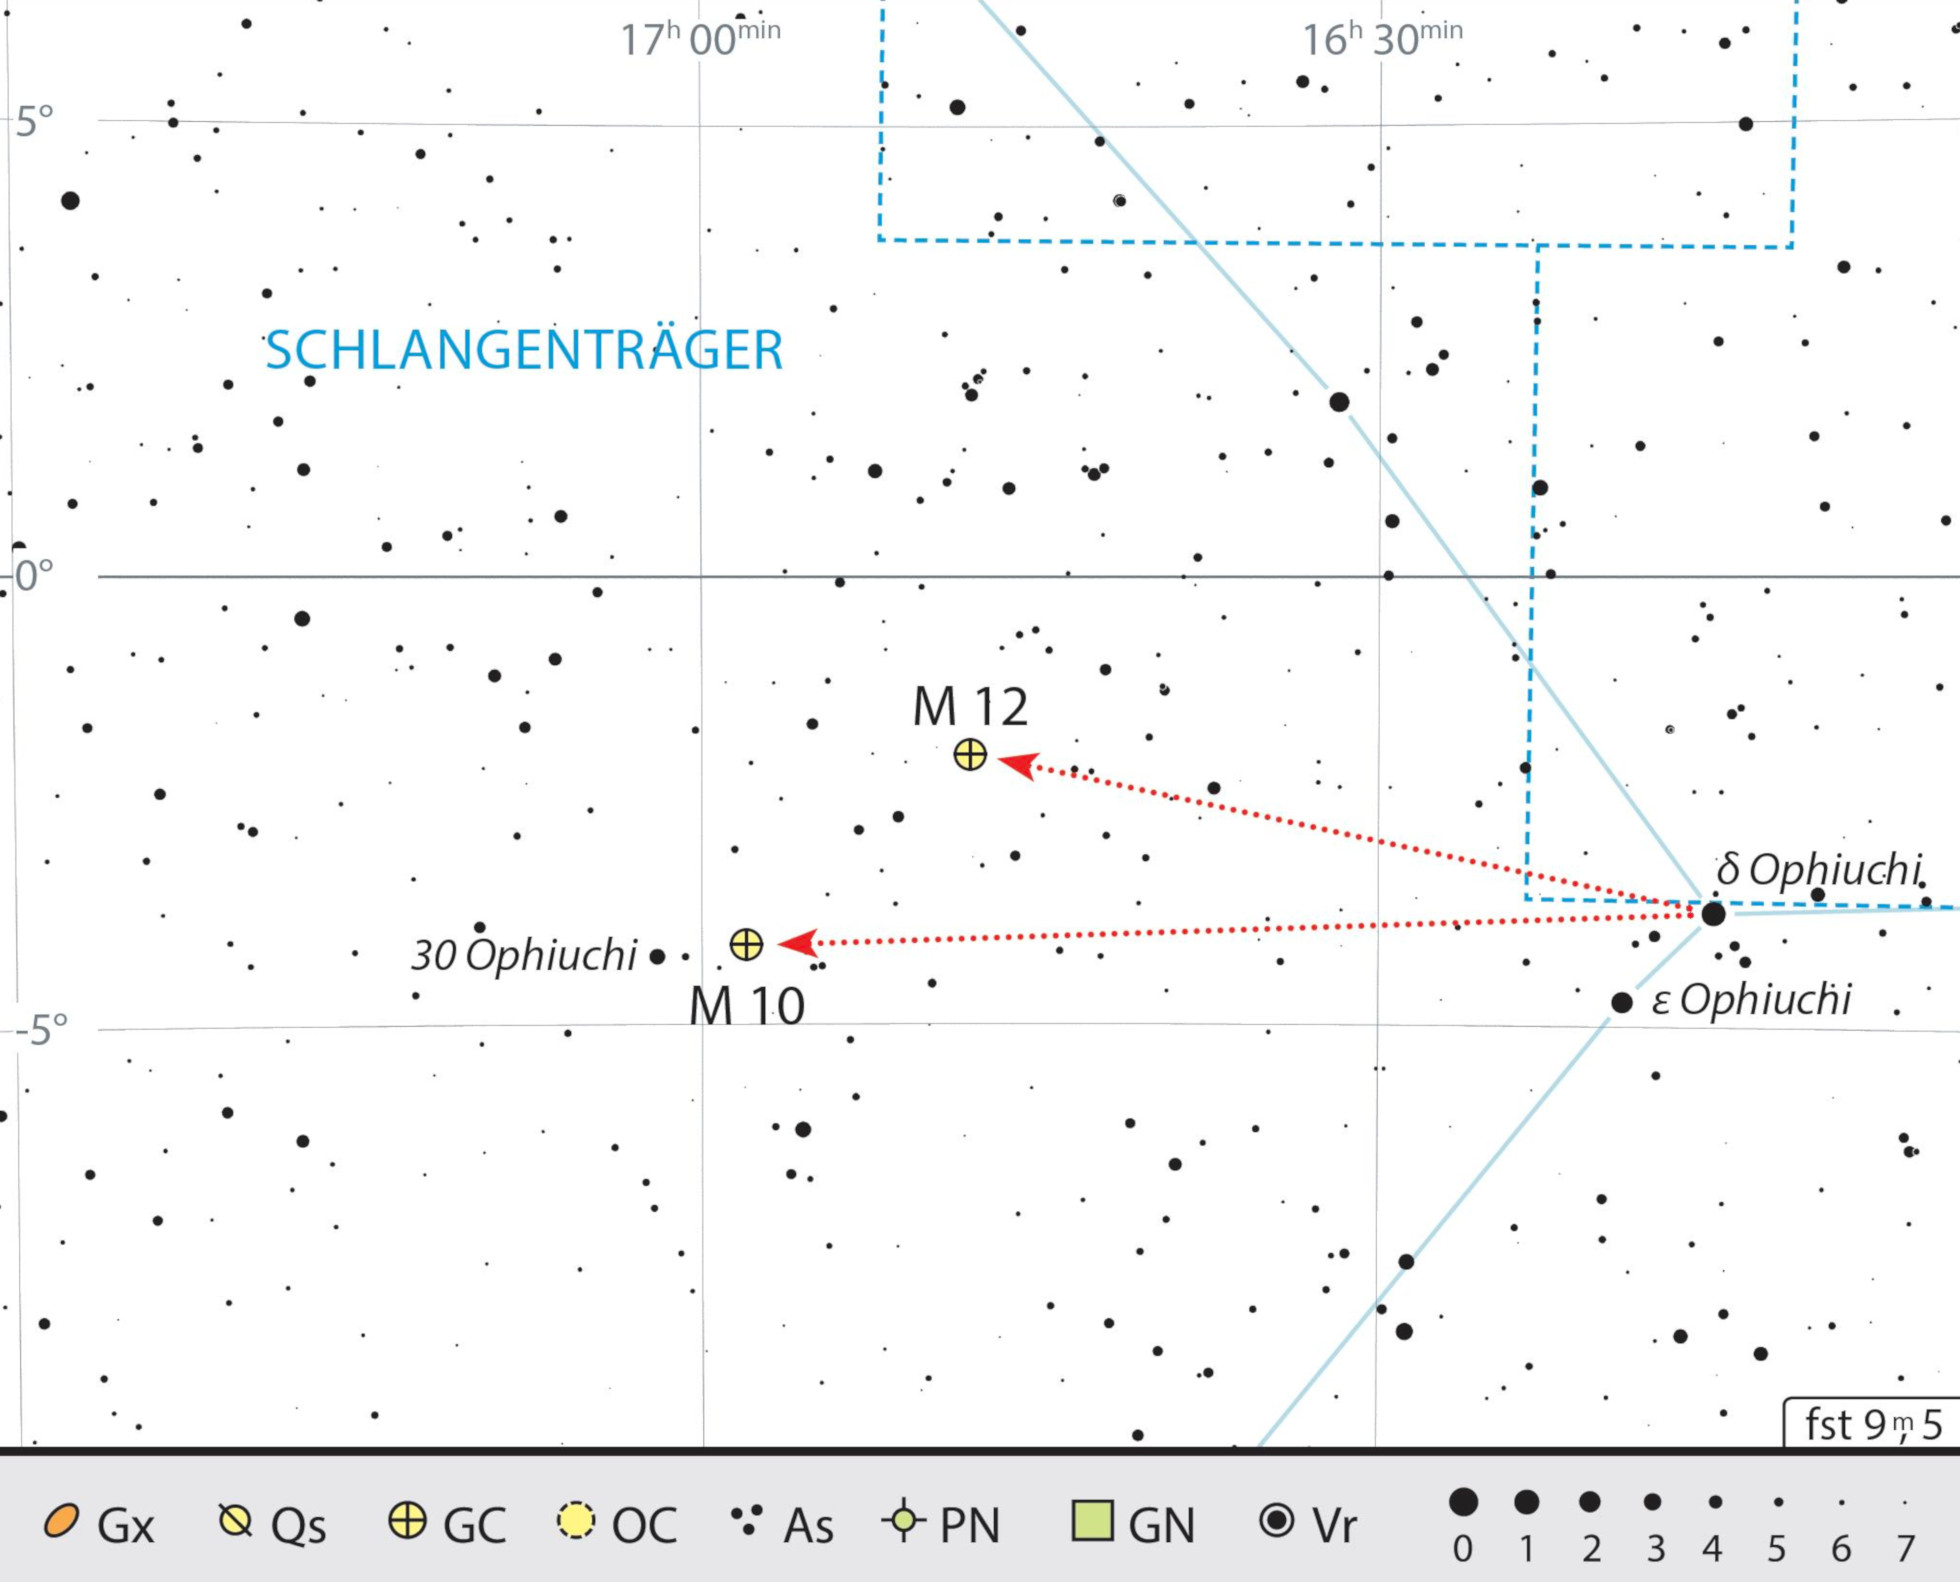 Location map of the two globular clusters M10 and M12 in the constellation of Ophiuchus J. Scholten